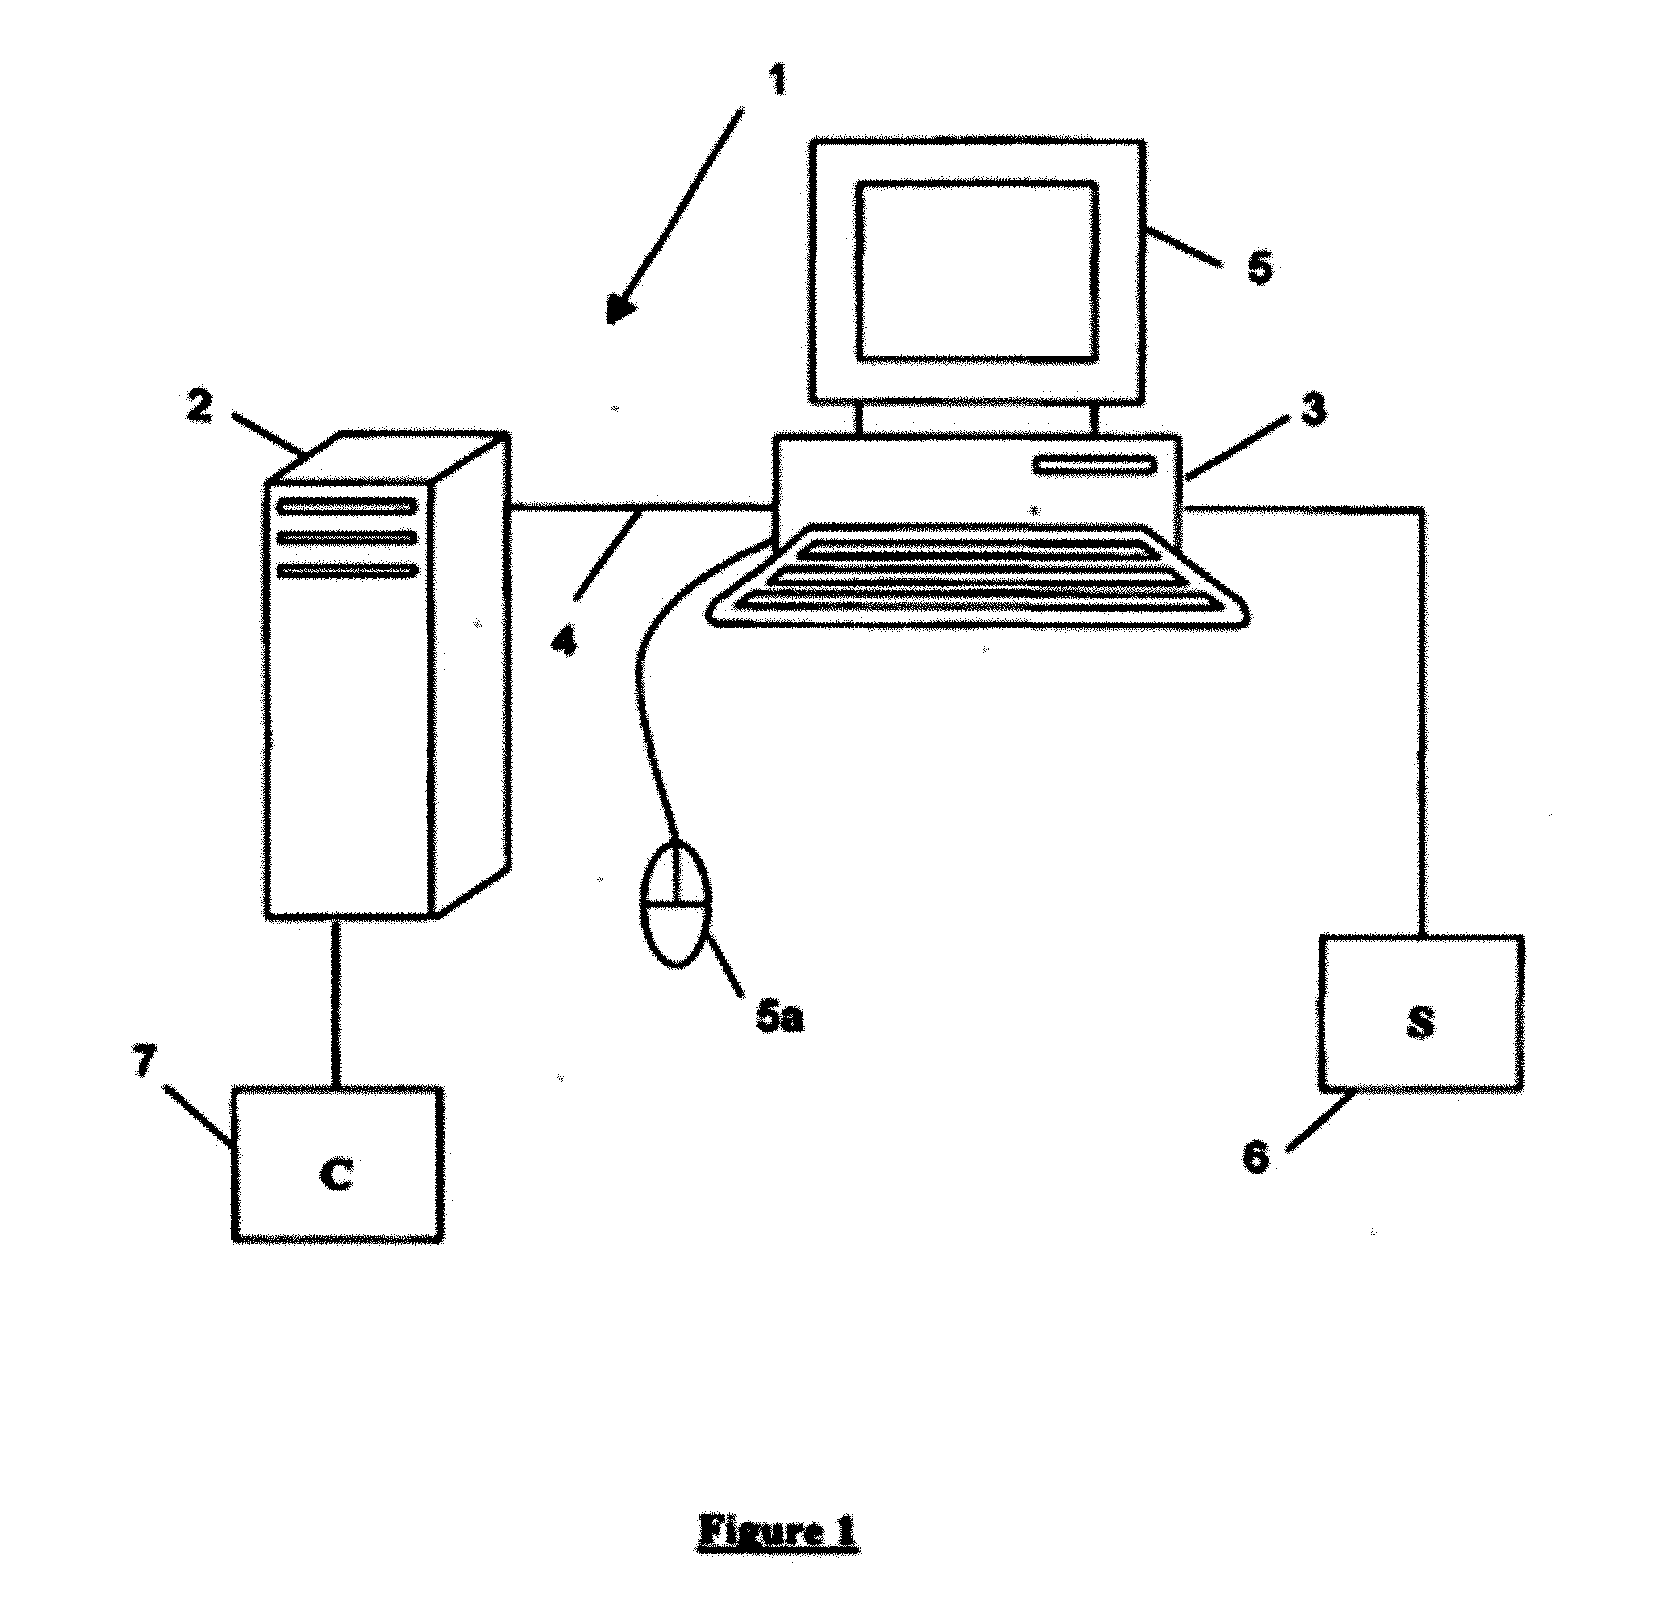 Menu Selection System and Method of Operation Thereof